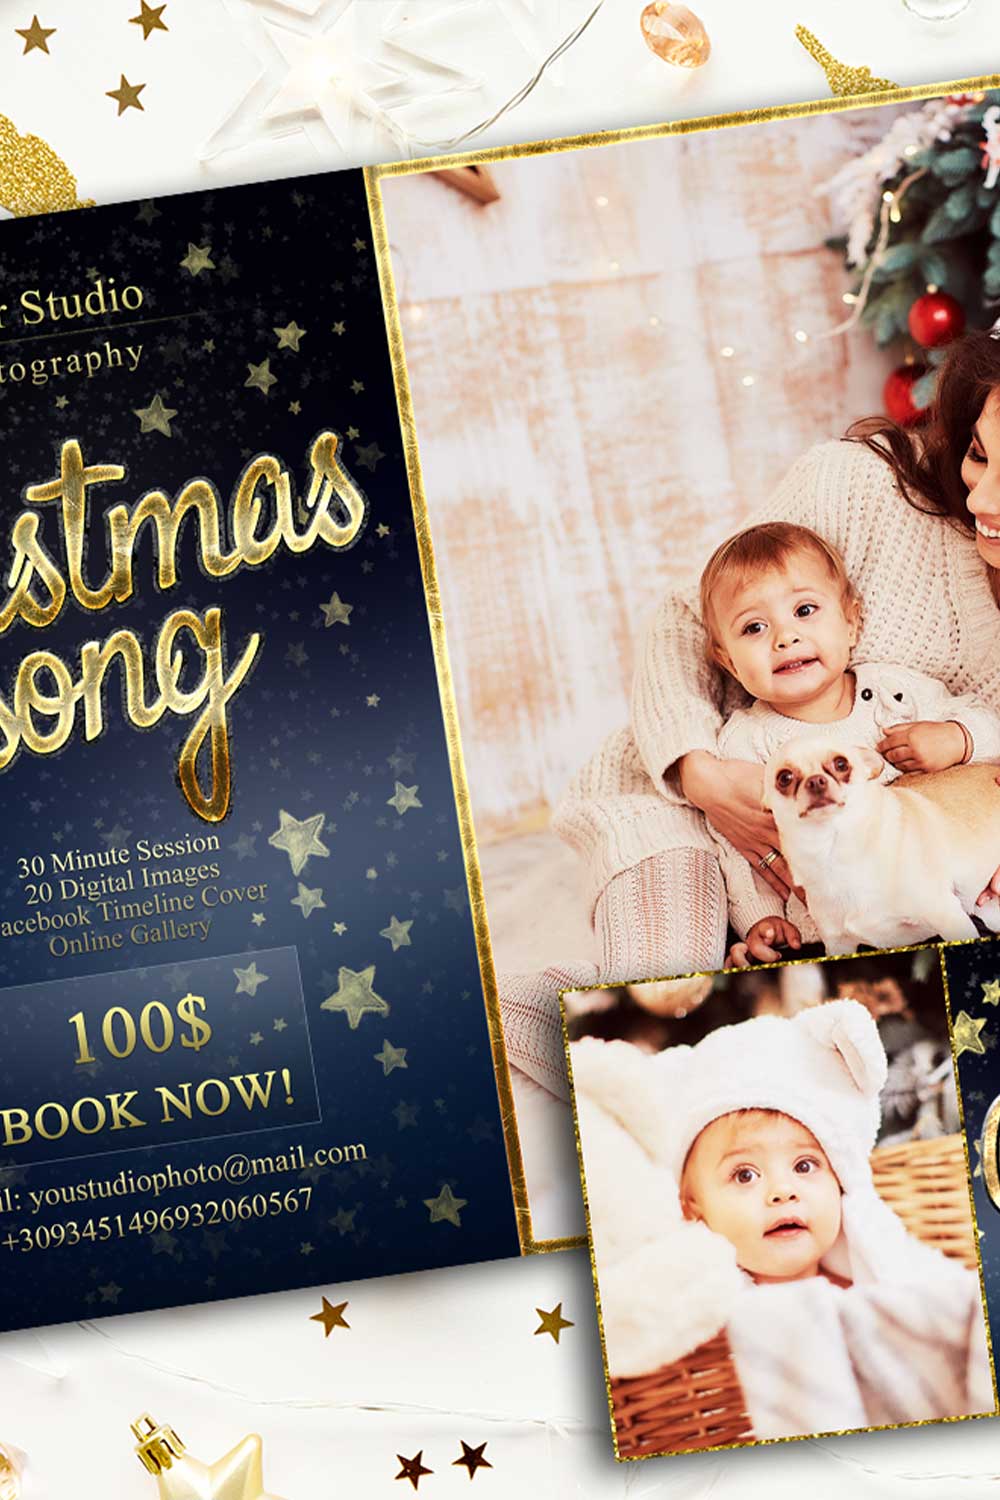 Christmas Mini Session Instagram And Facebook Template Pinterest Image.